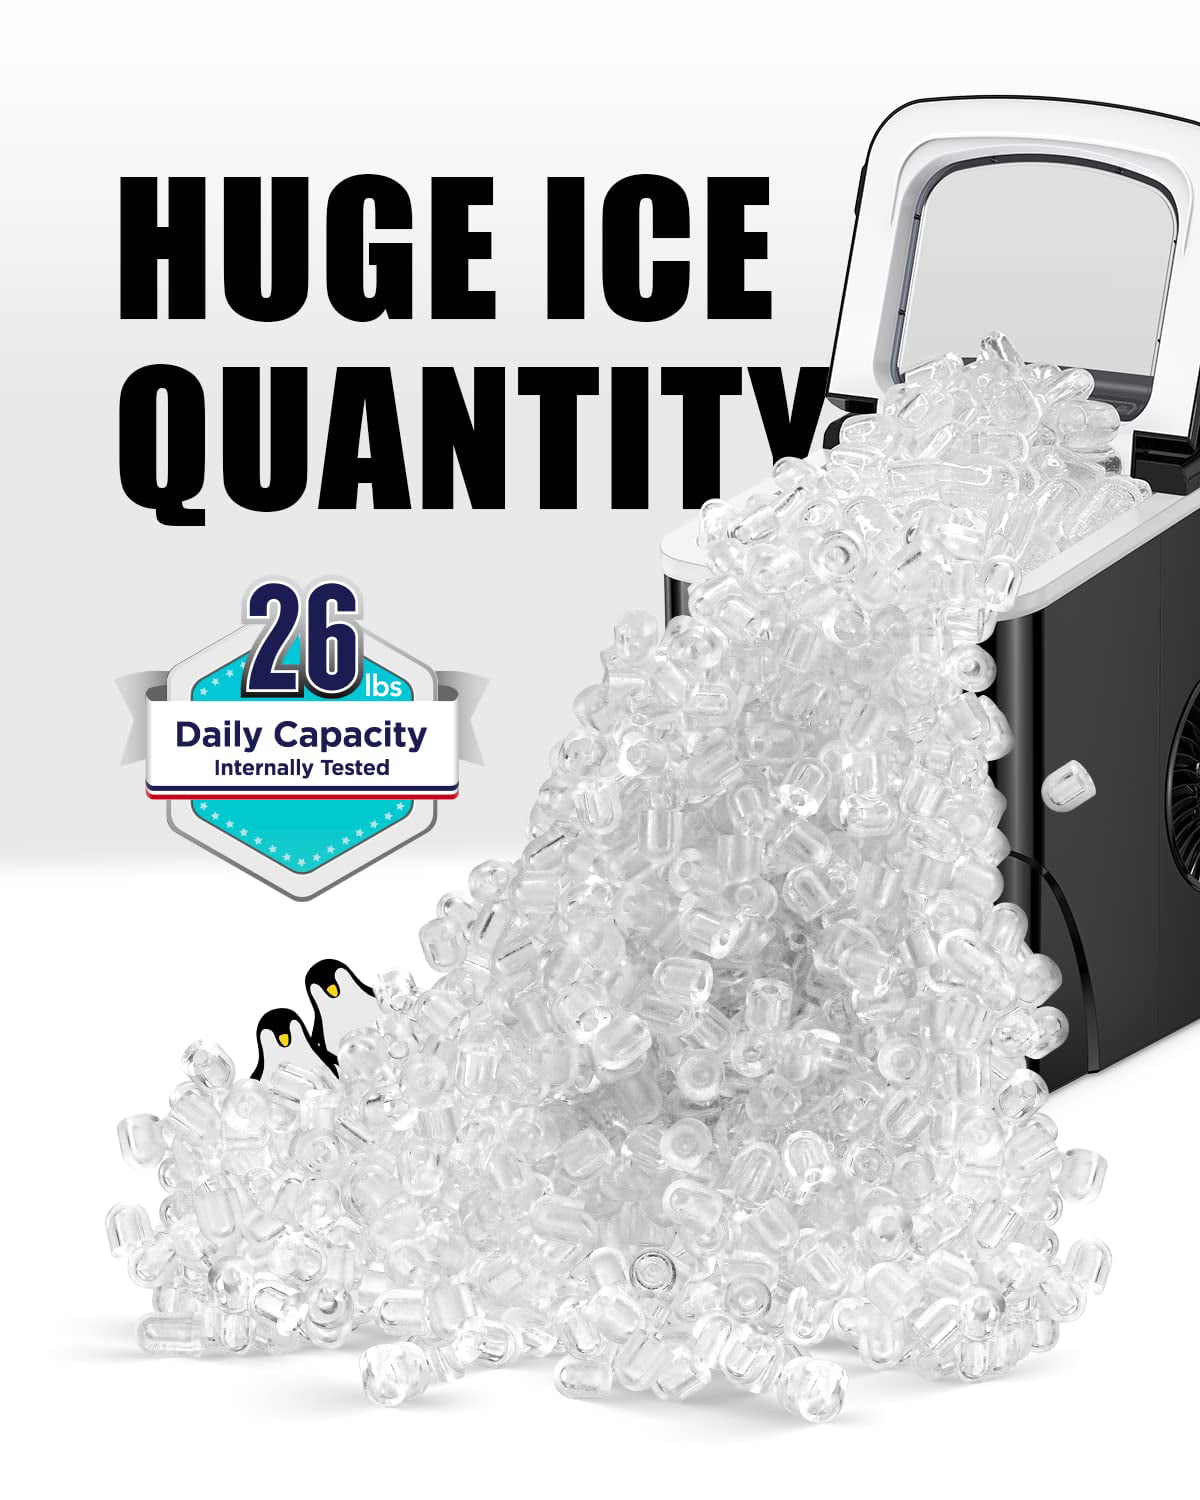 Cozeemax Ice Maker Machine Countertop, Self-Cleaning, 26lb 2 Cube Sizes in 24 Hours, 9 Ice Cubes in 6 Minutes, Ice Machine with Ice Scoop and Basket